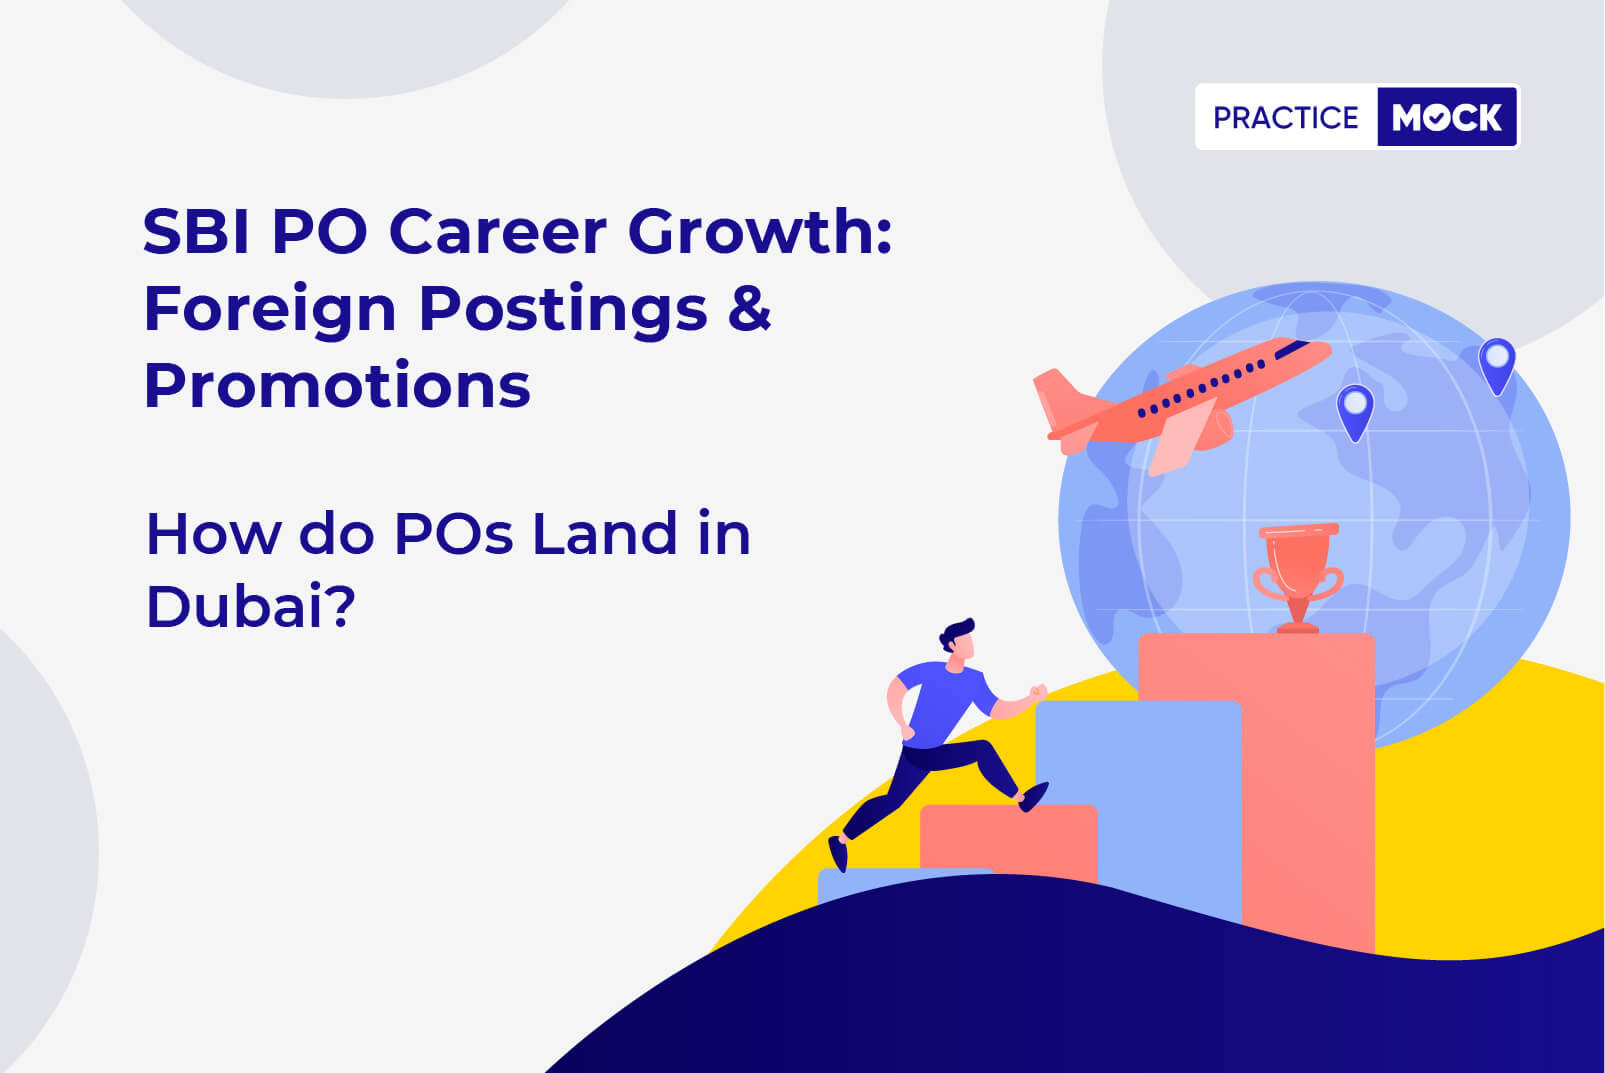 SBI PO Career Growth Promotions & Foreign Postings